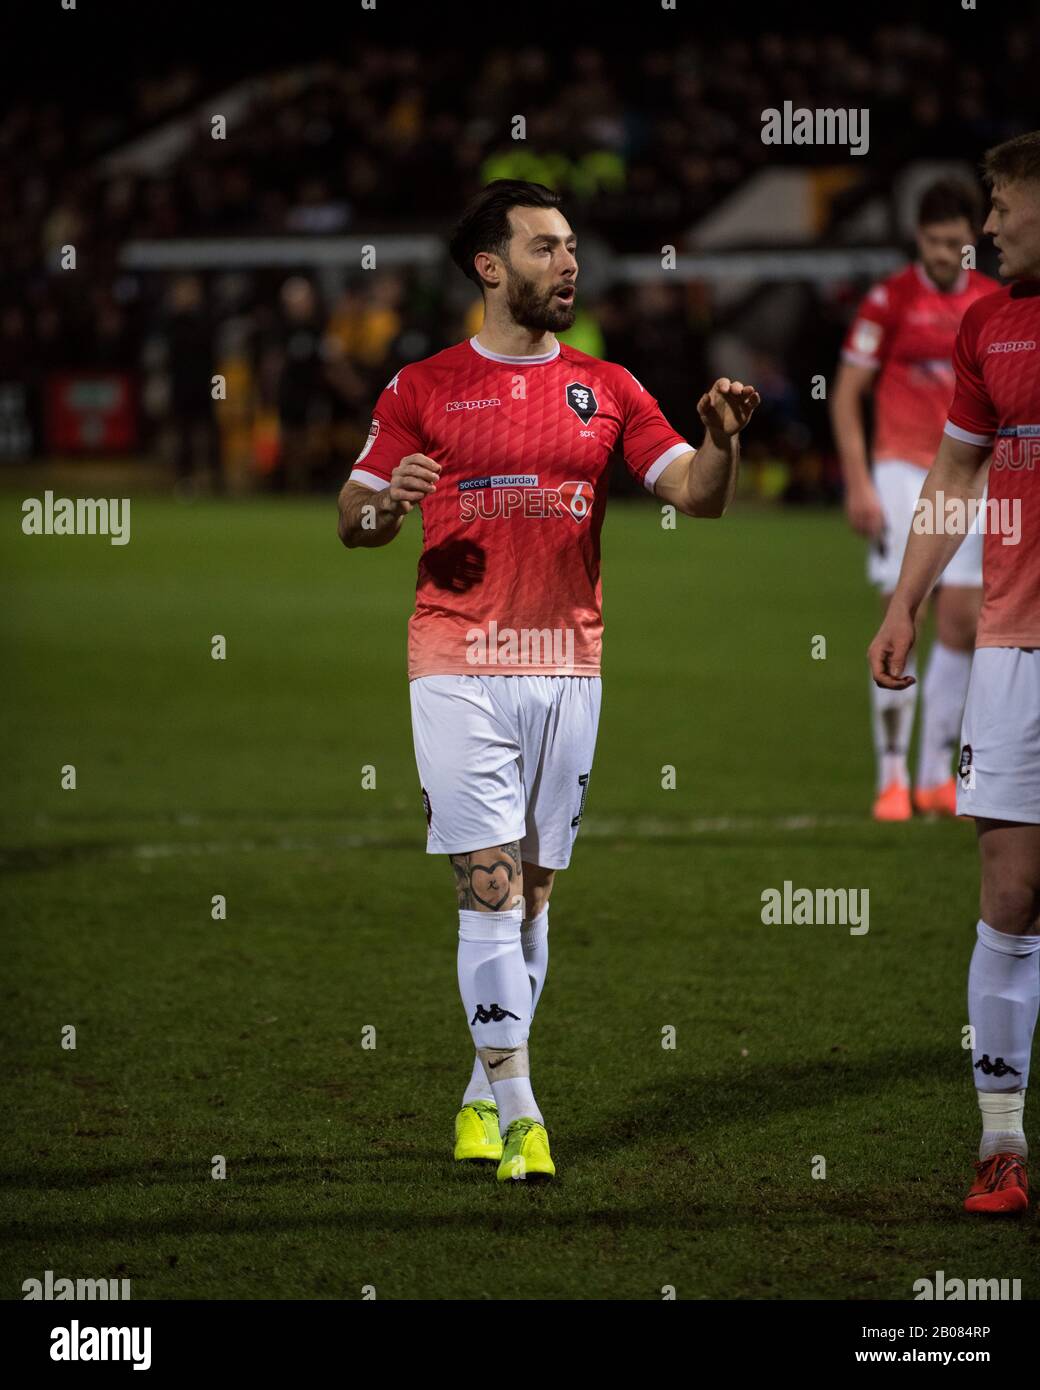 Richie Towell. Salford City FC. Stock Photo